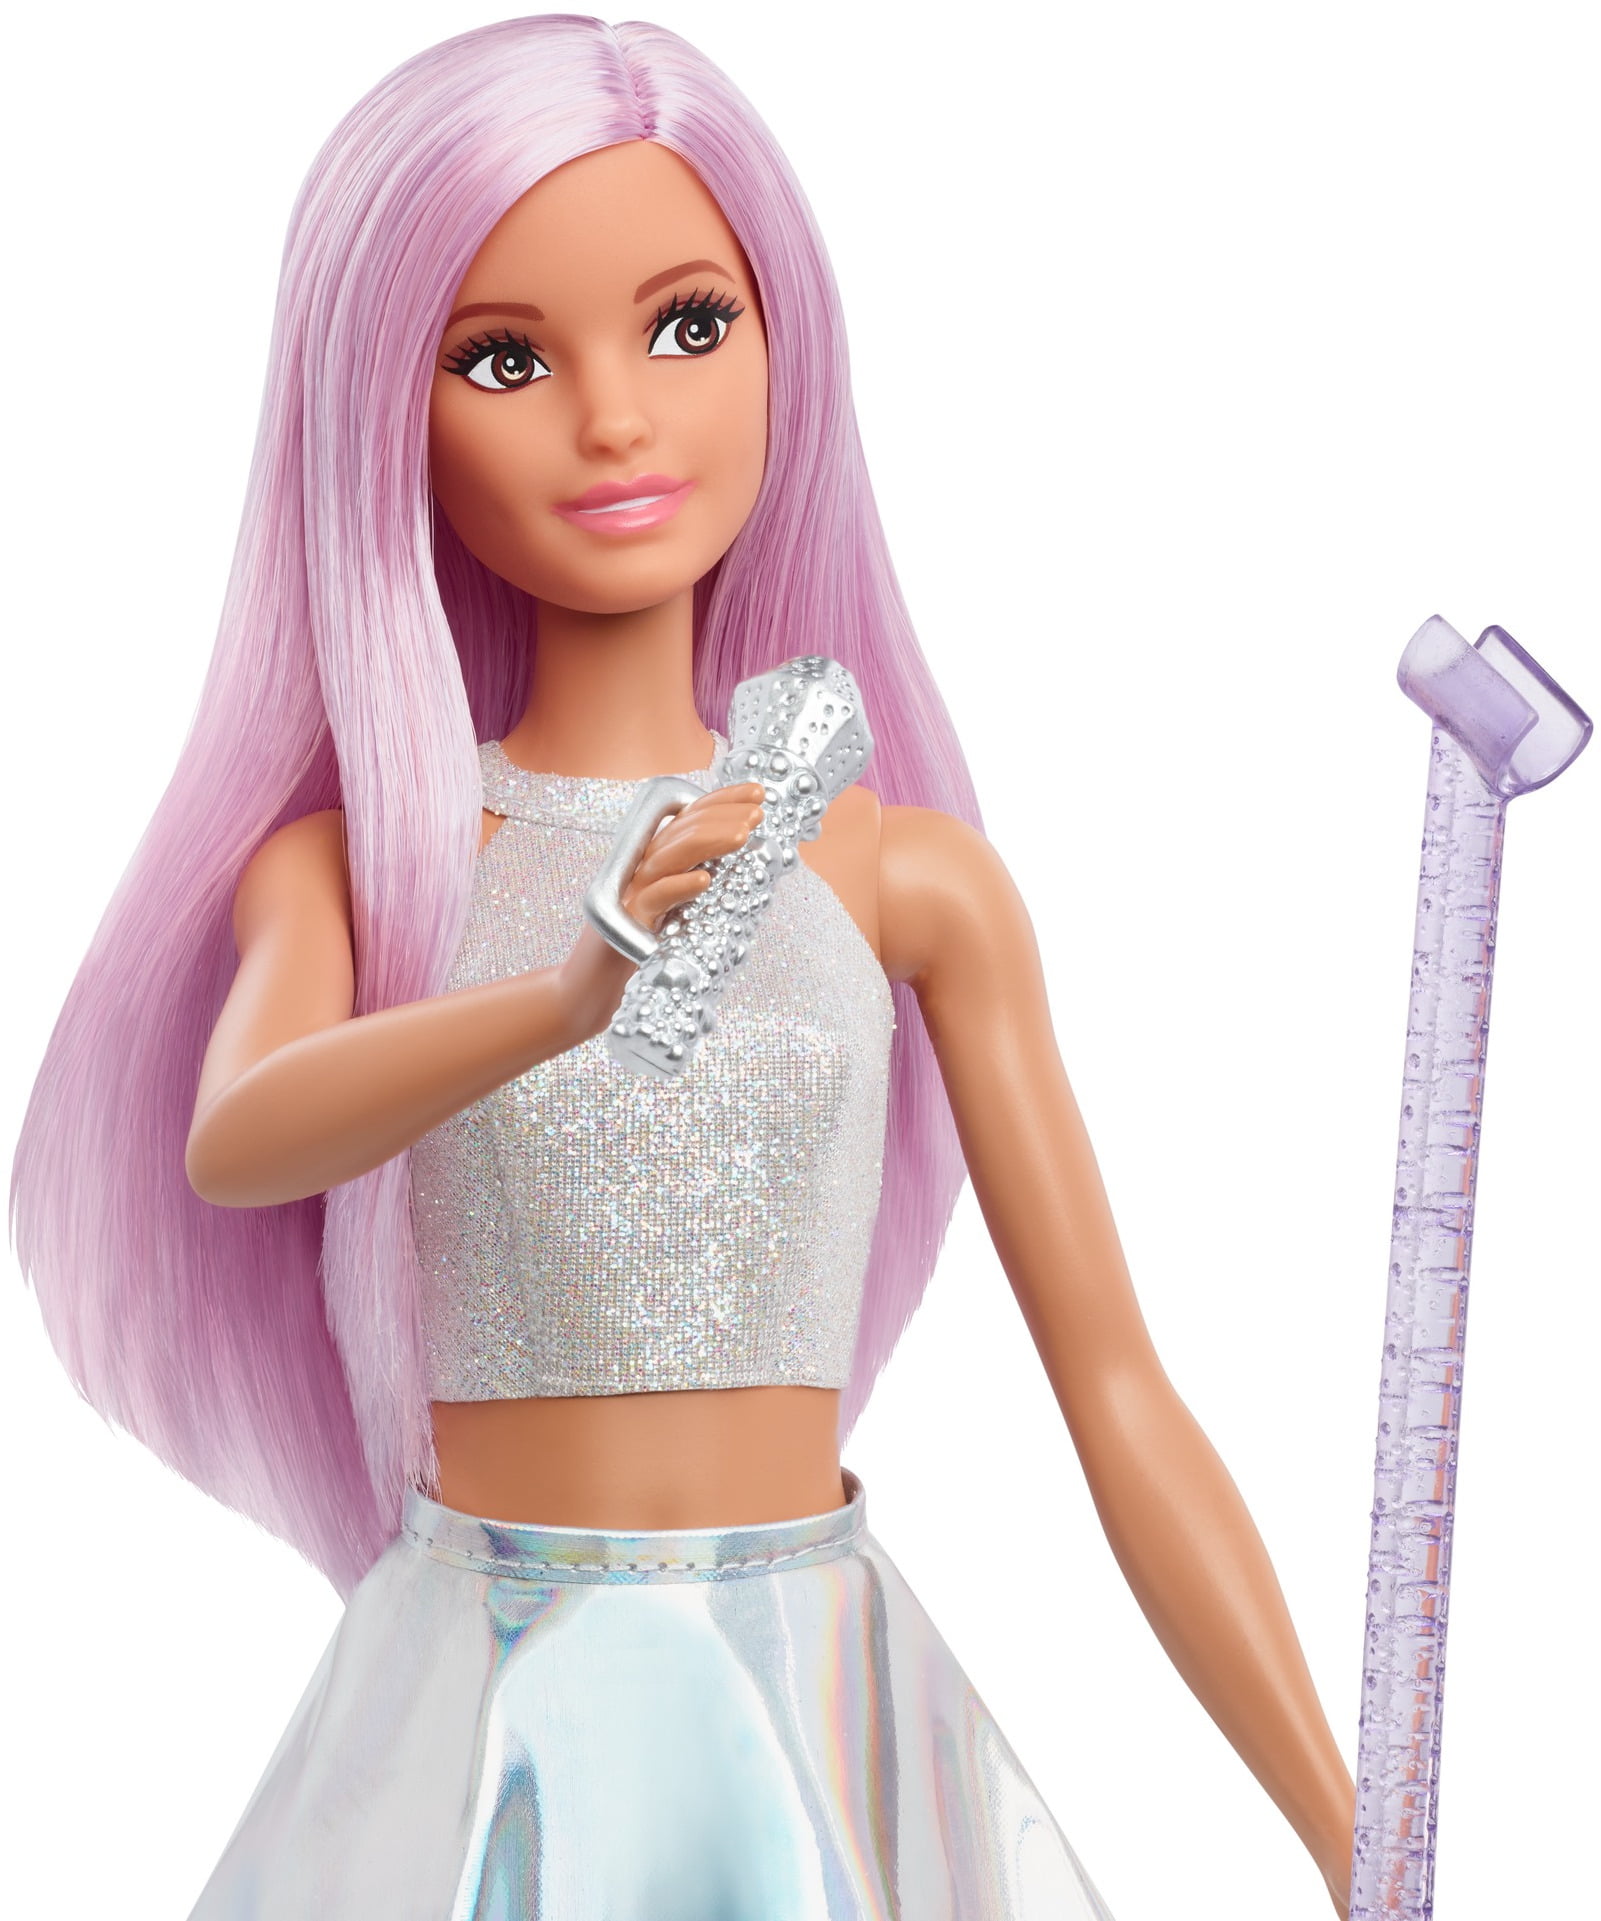 Barbie Pop Star Doll with Accessories 